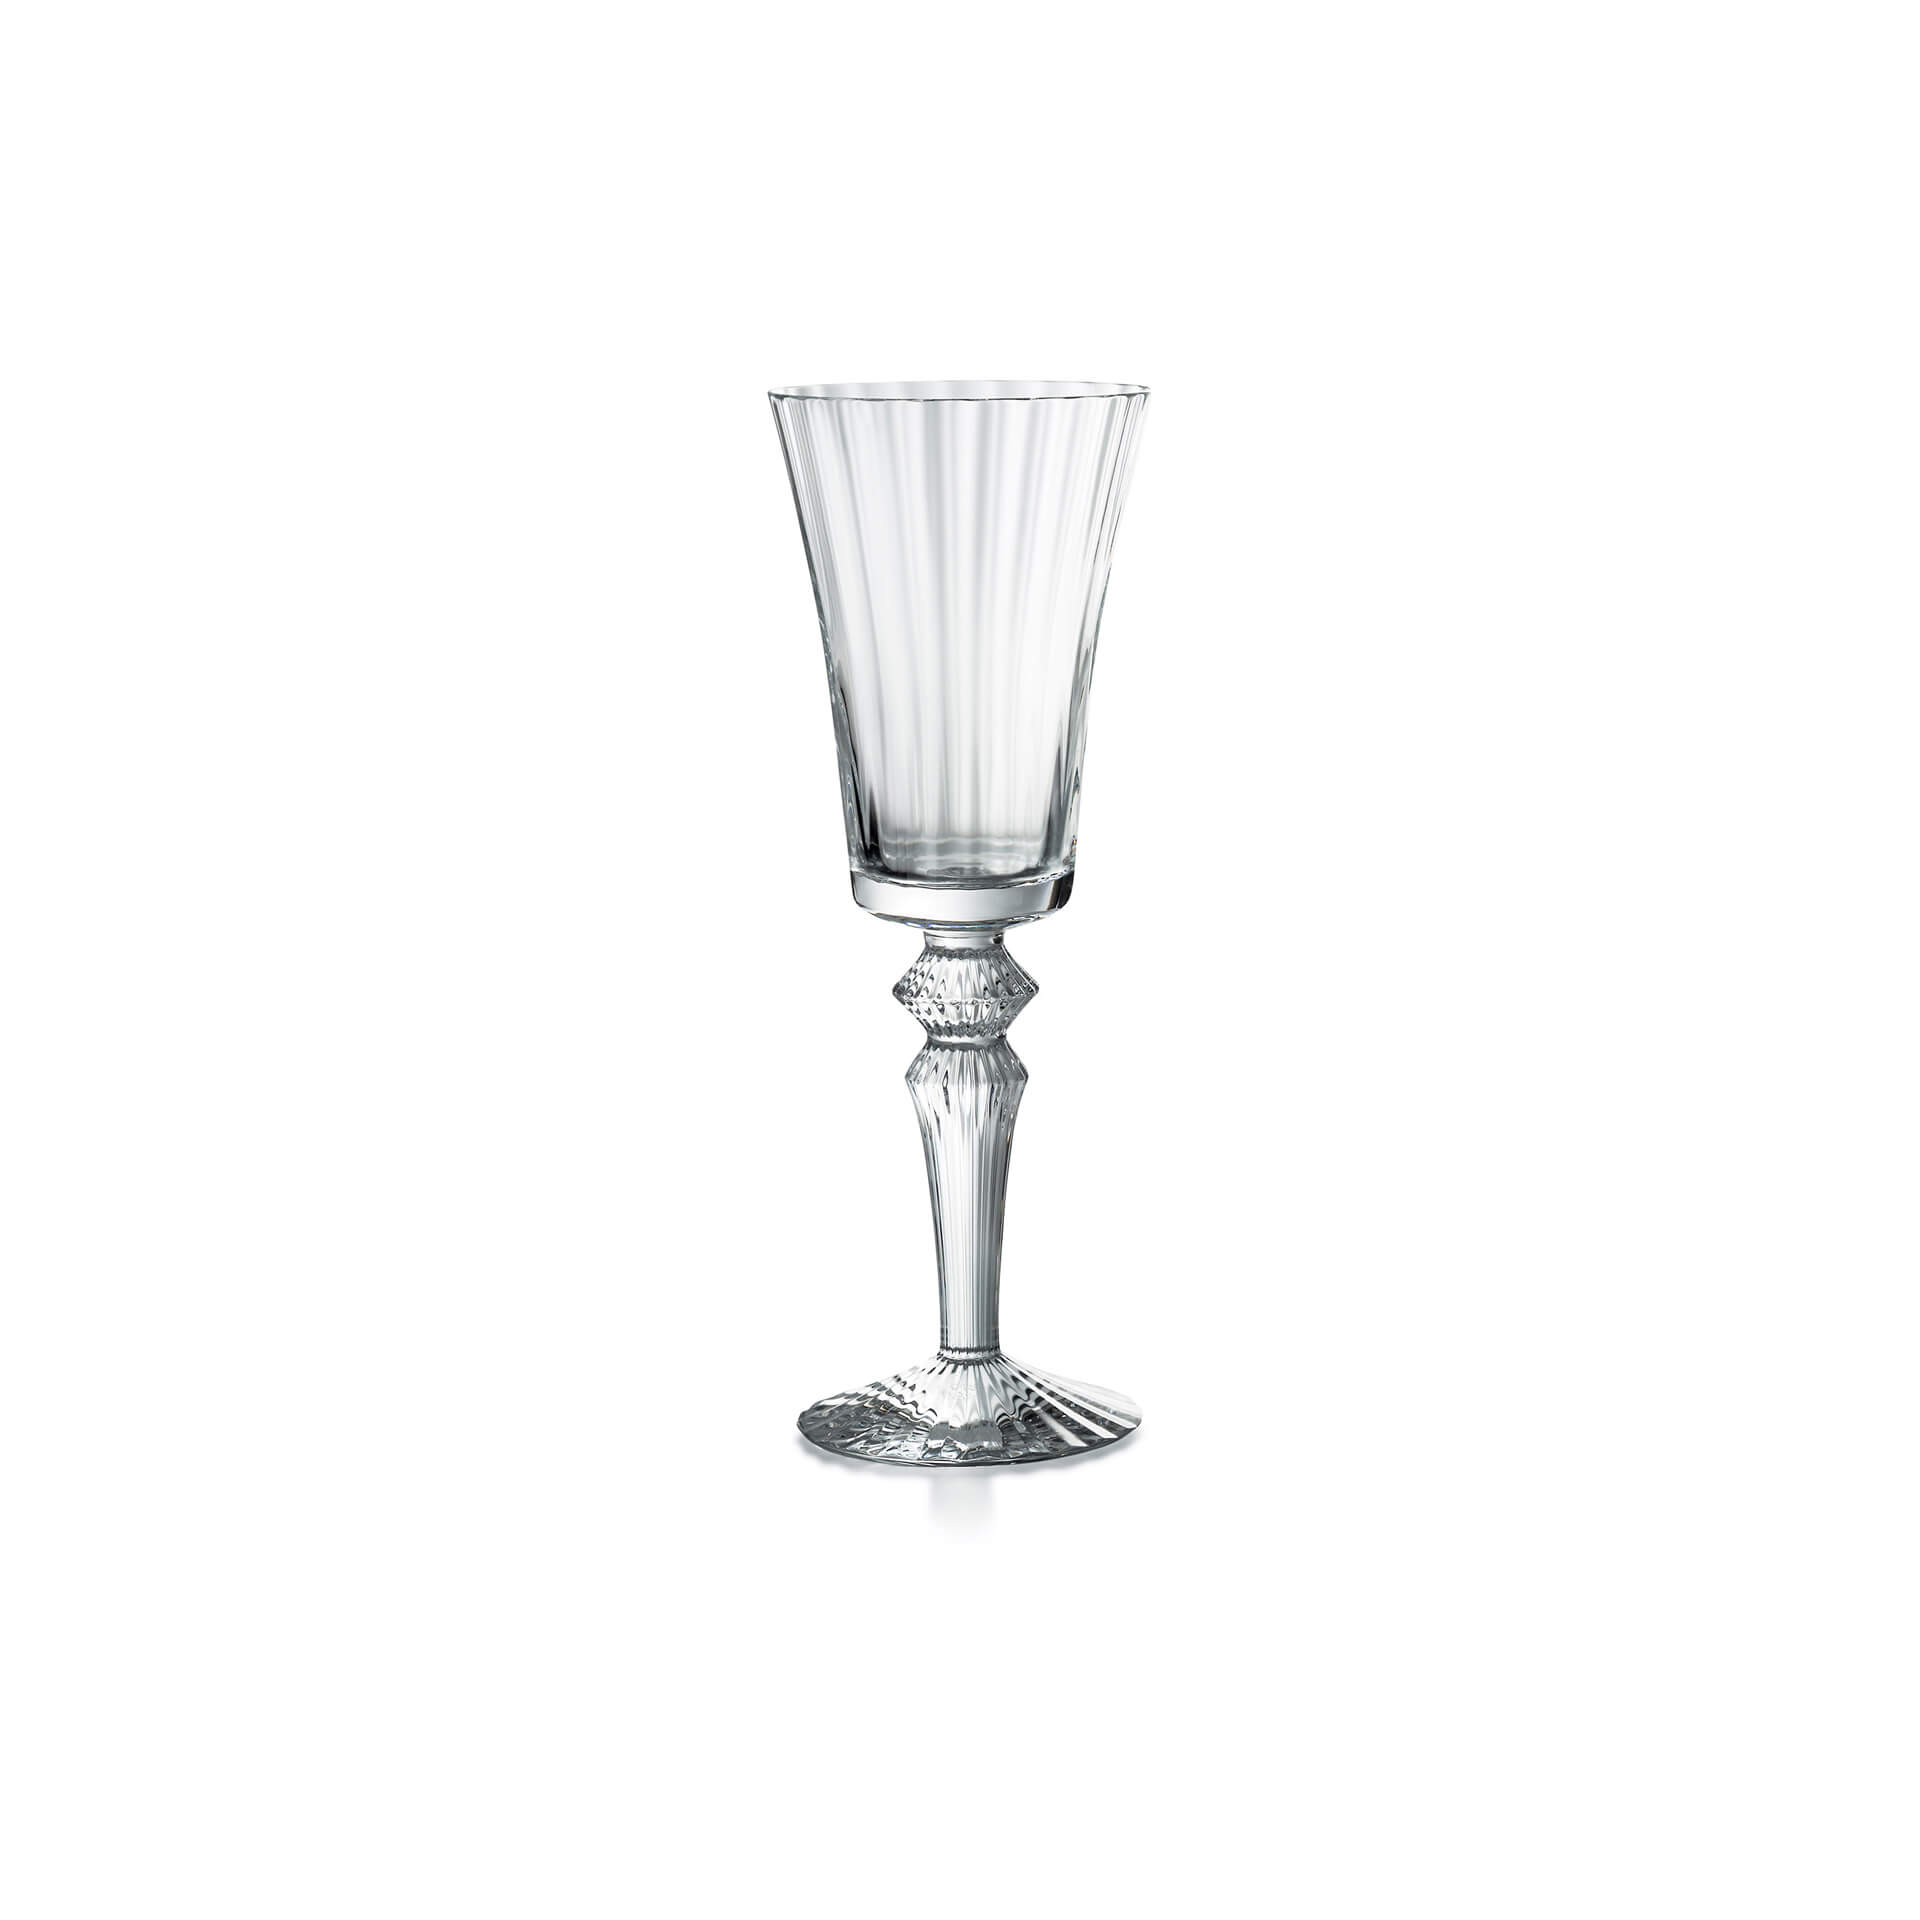 Mille Nuits Glass Tall 1 Baccarat